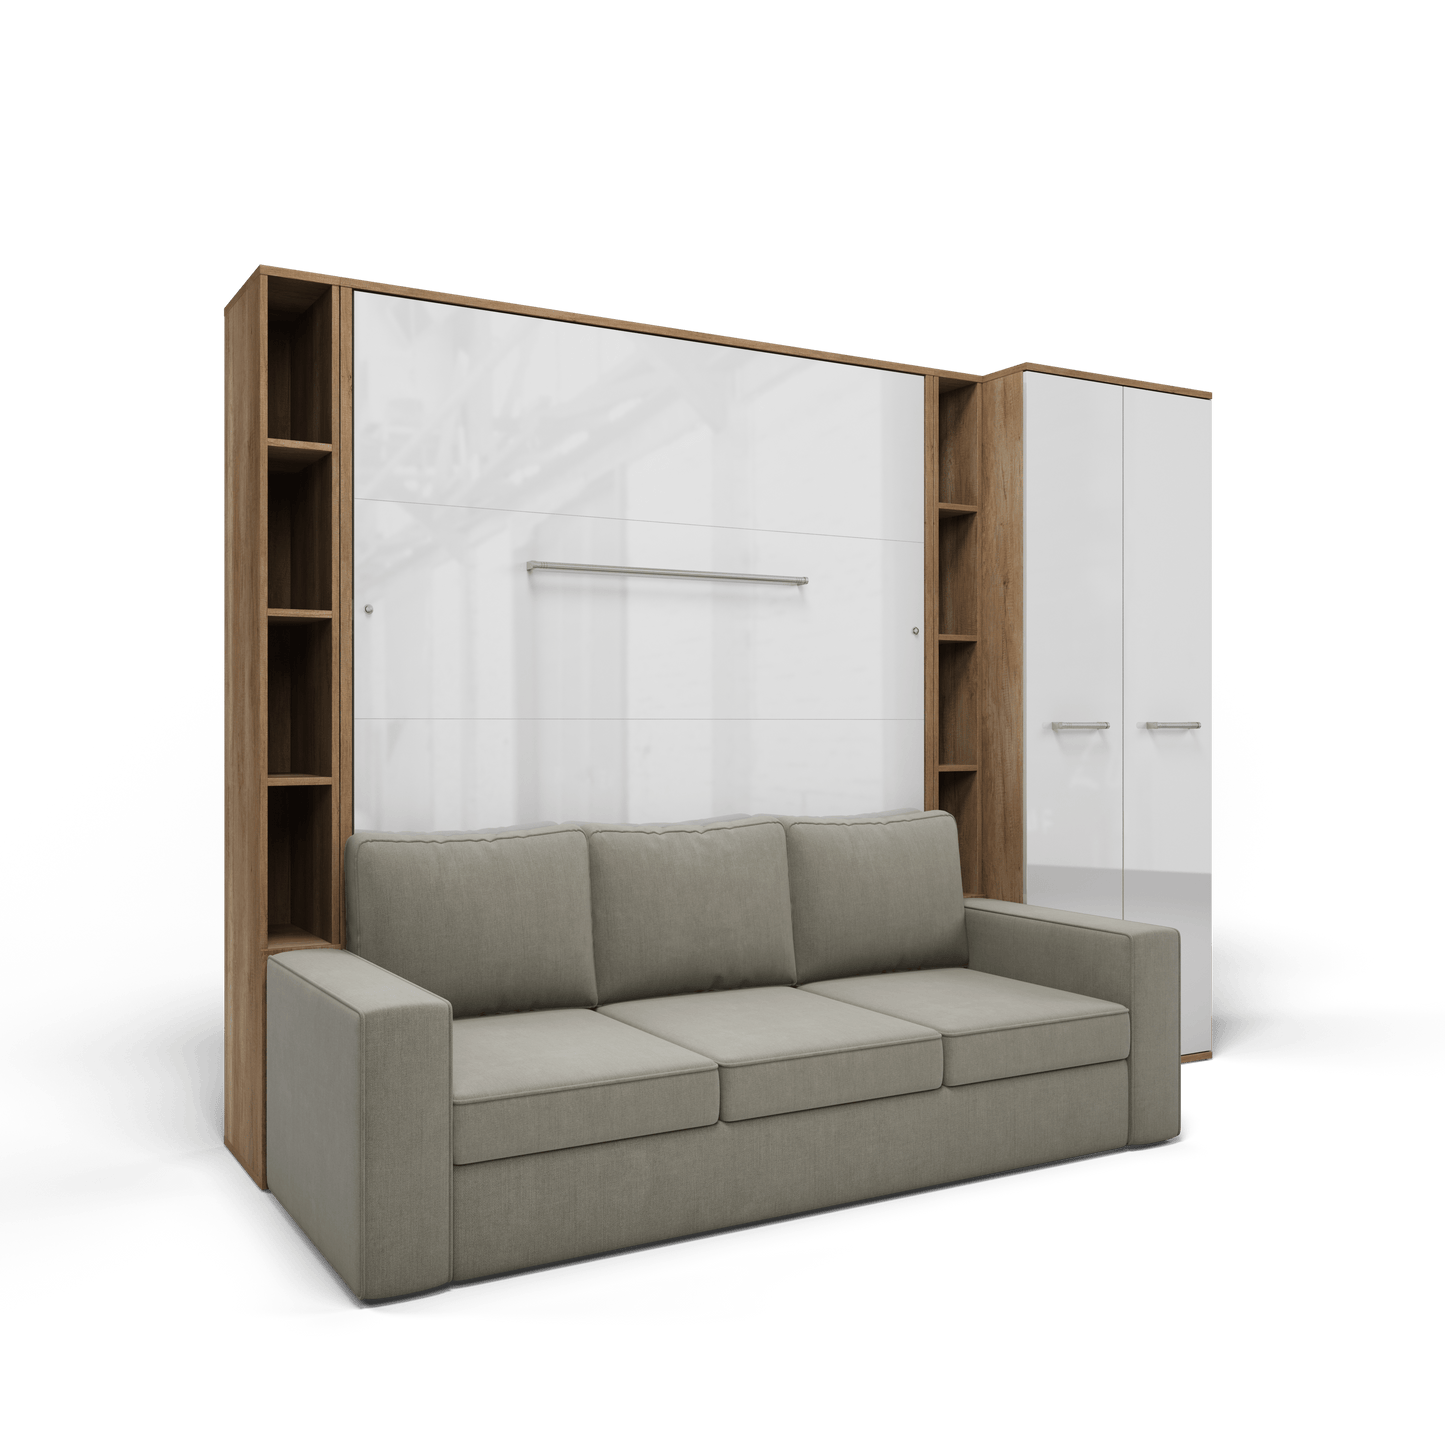 Maxima House Maxima House Vertical Queen size Murphy Bed Invento with a Sofa, two Cabinets and Wardrobe Oak Country/White + Beige IN014/23/24OW-B